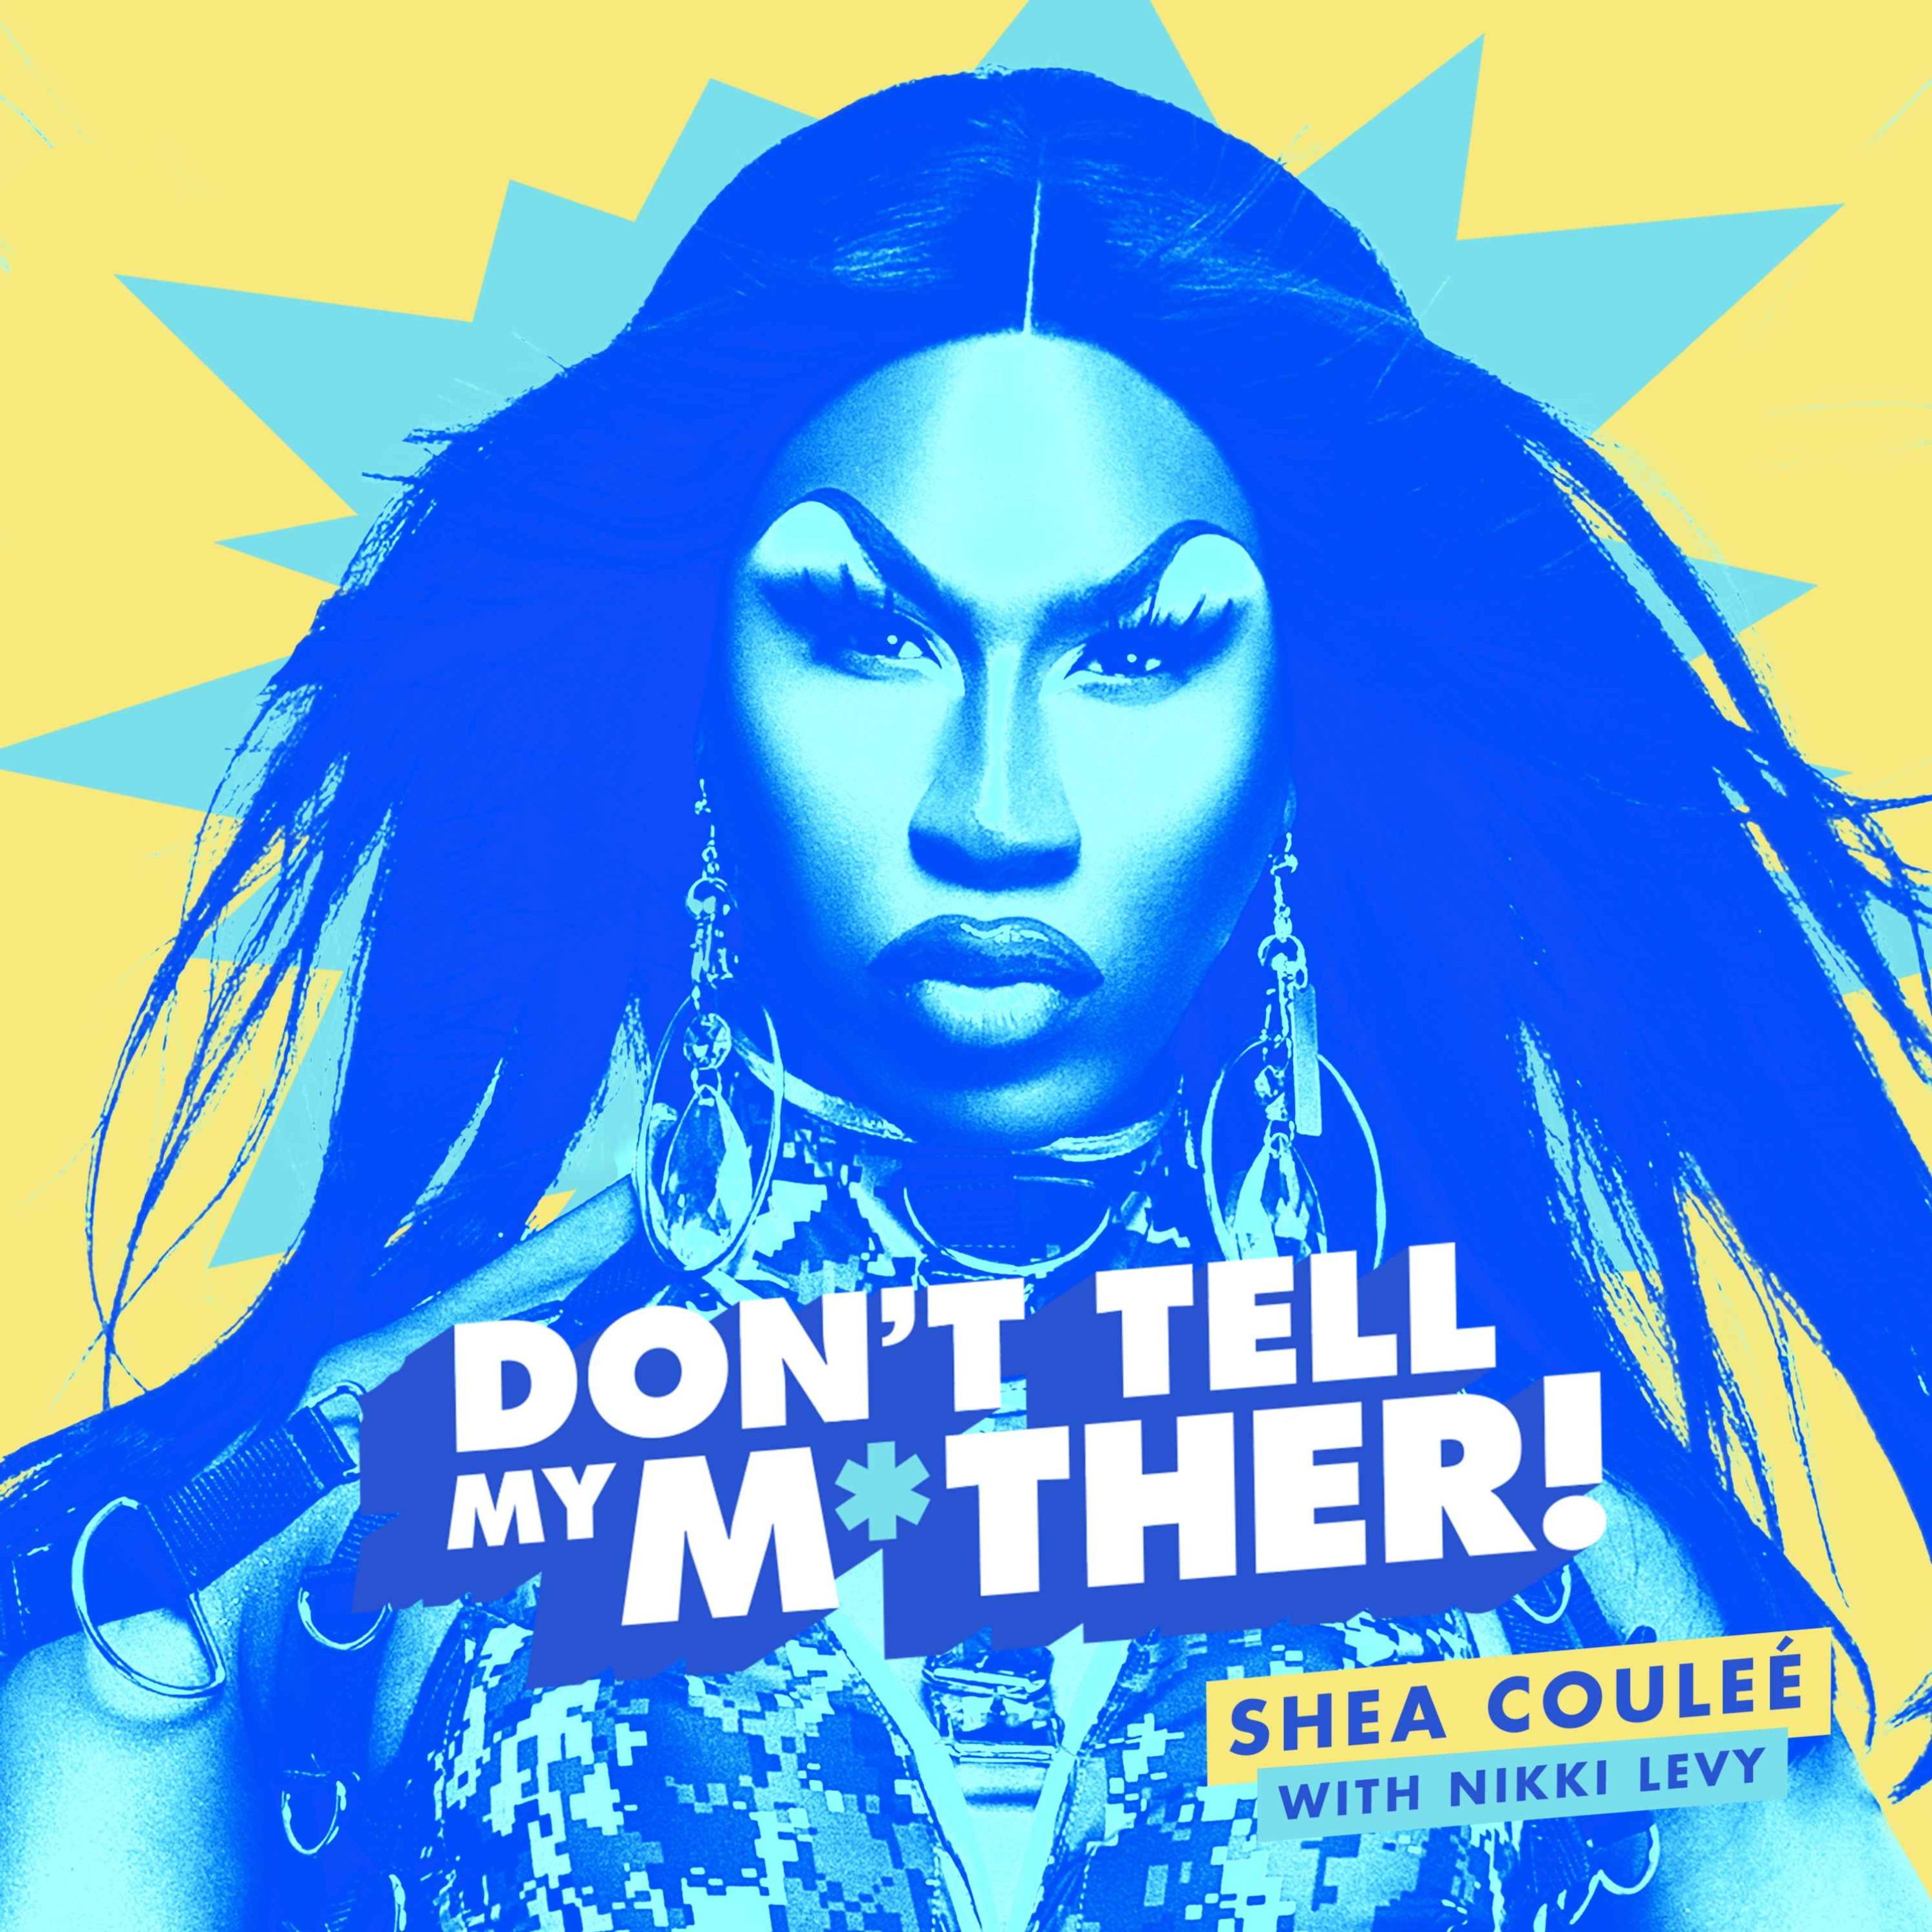 RuPaul’s Drag Race Icon Shea Couleé Brings the Heat